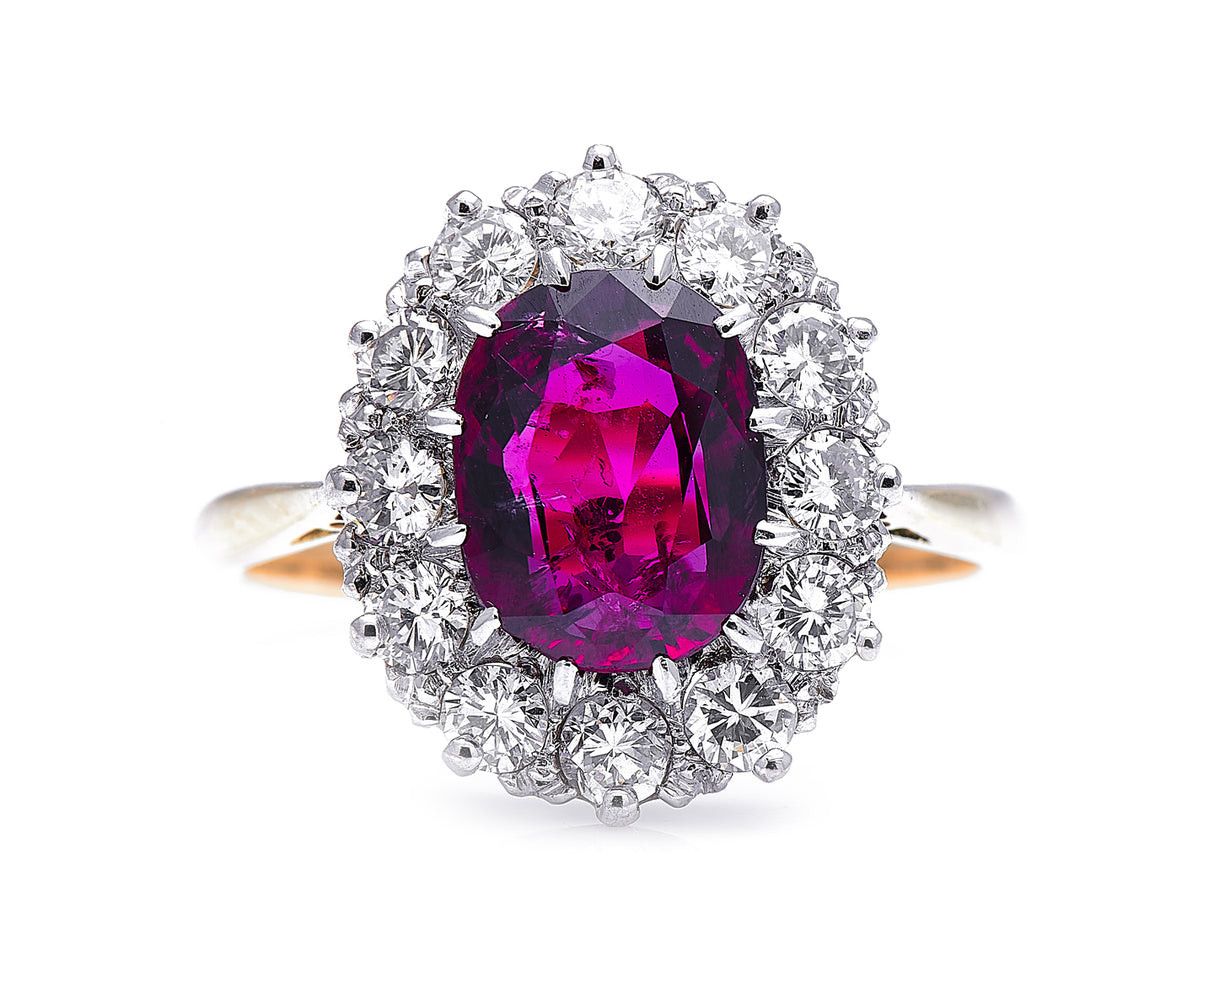 Edwardian, 18ct Gold, Rare 3ct Ruby and Diamond Cluster Ring